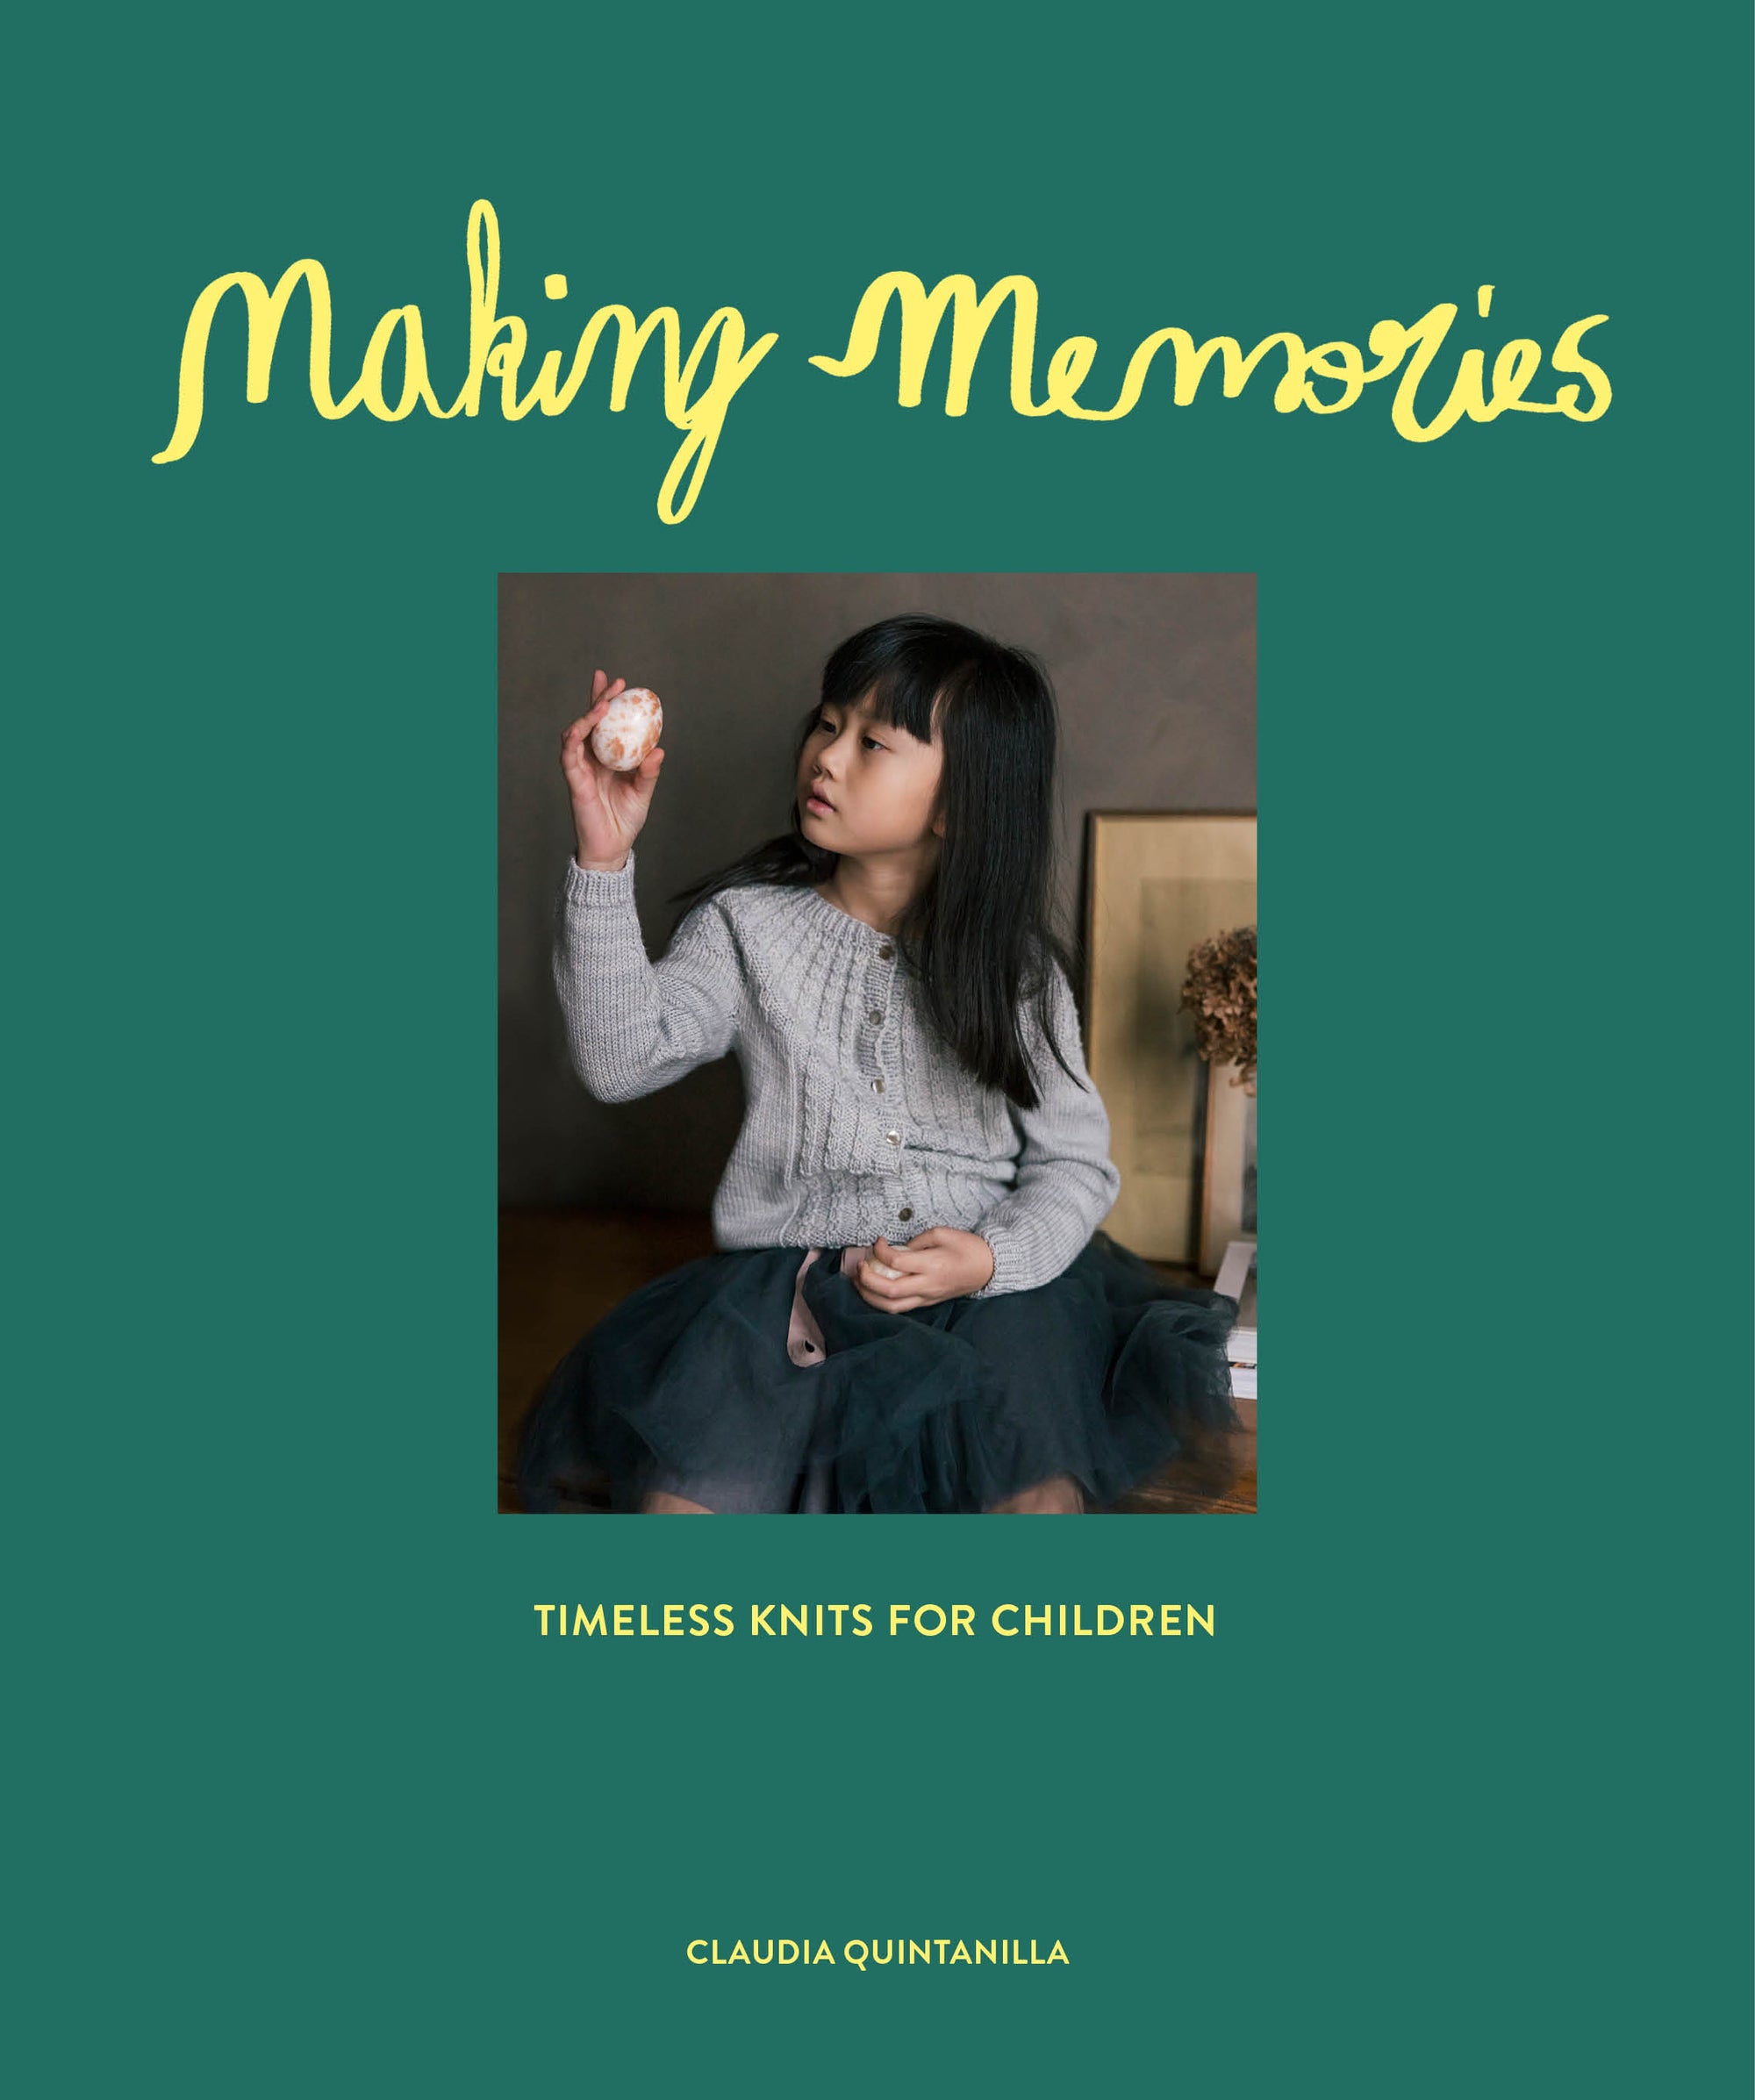 Making Memories: Timeless Knits for Children by Claudia Quintanilla Laine